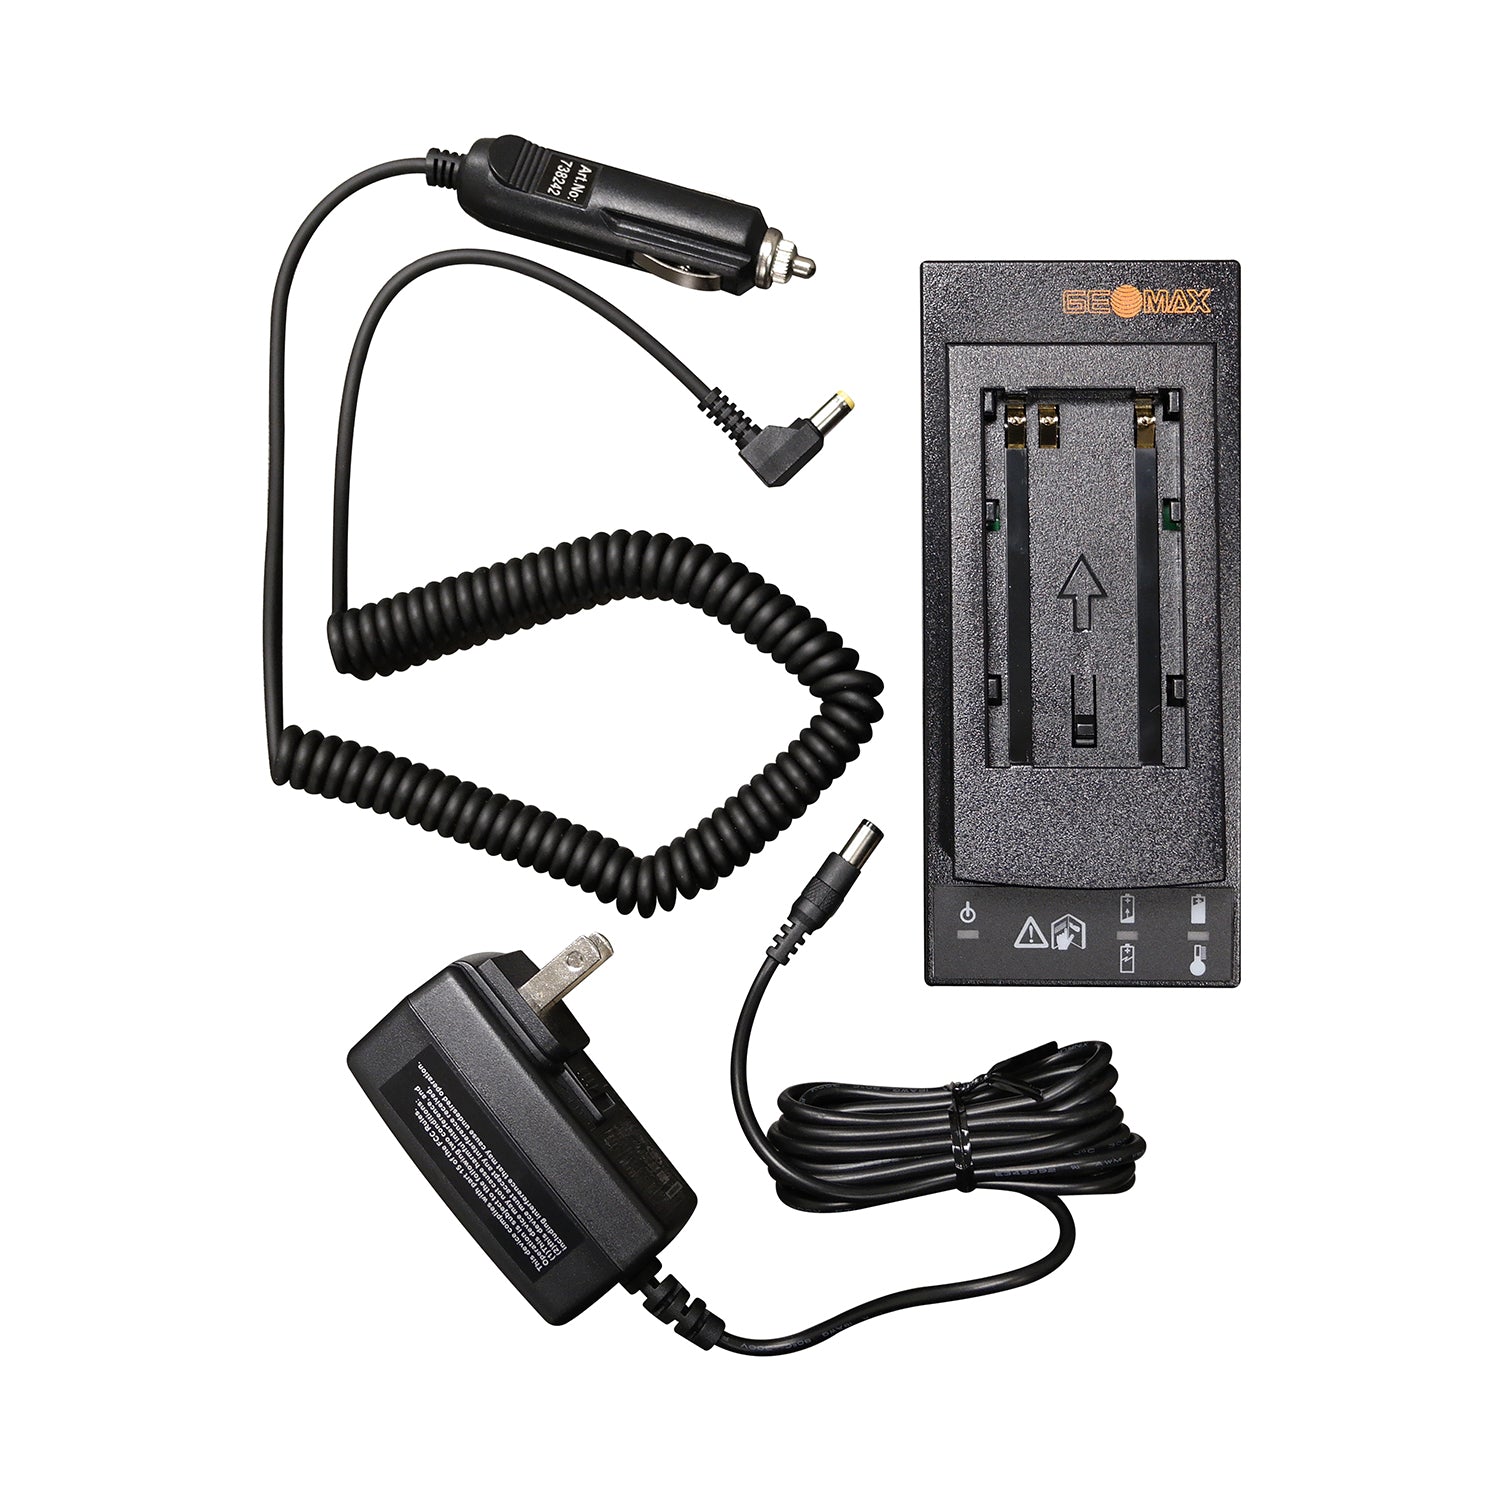 GeoMax ZCH201 Charger Set - For GeoMax ZBA200 & ZBA400 Batteries -Total Stations- eGPS Solutions Inc.